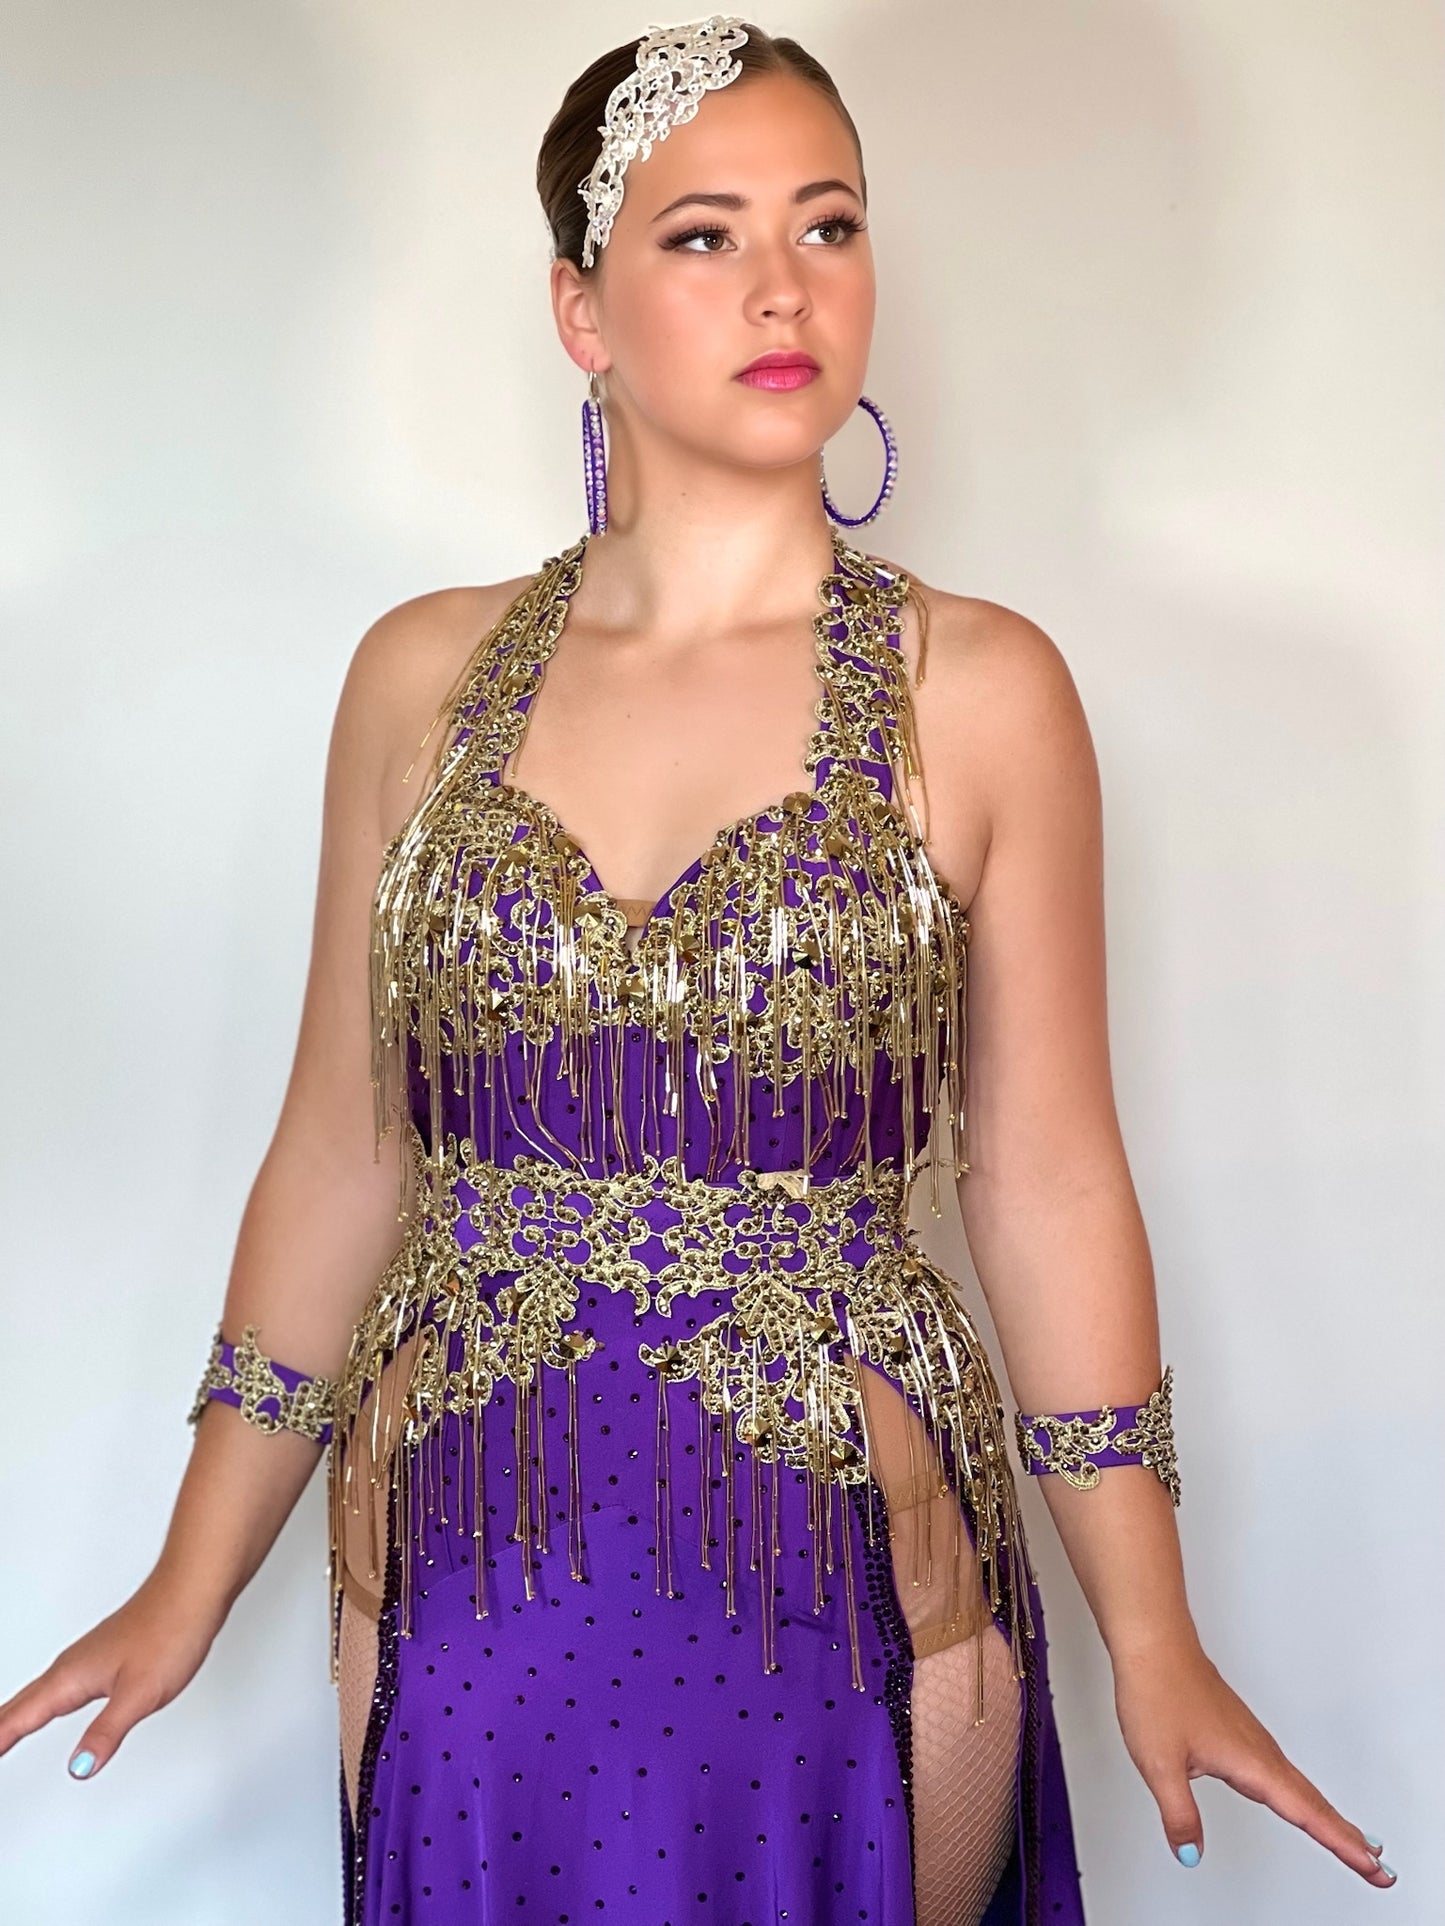 089 Purple & Gold heavily decorated Latin  Dress. Gold bead droppers, gold metallic appliqué & gold stones. Detachable belt with main dress stoned in purple velvet